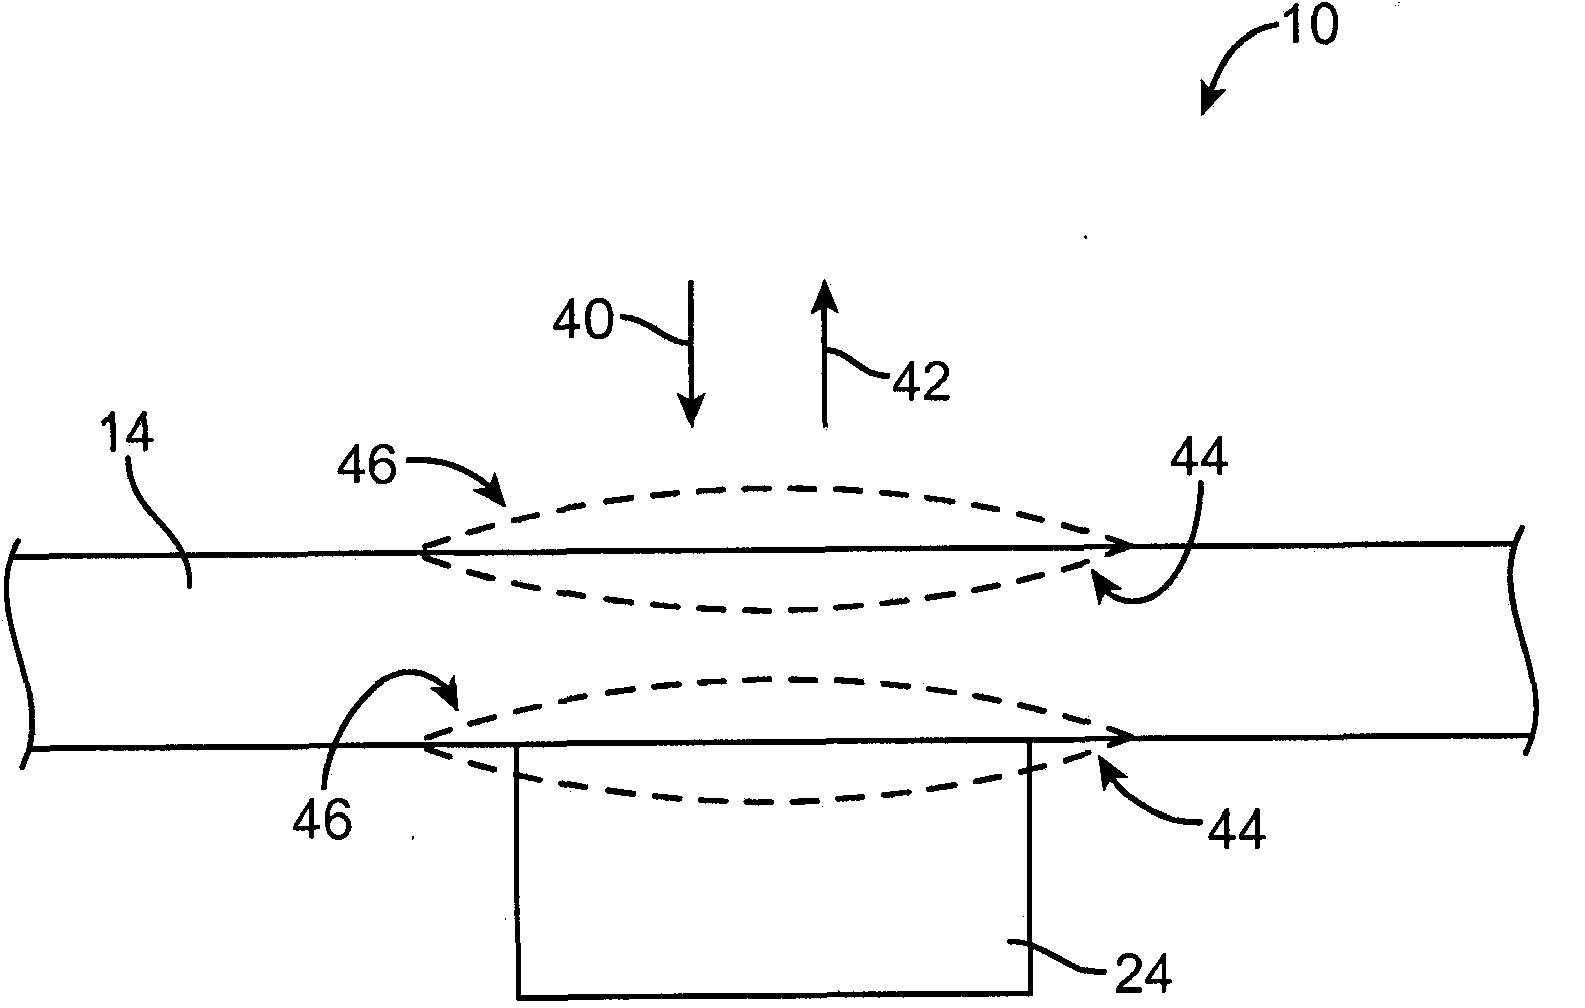 Electronic devices with flexible displays